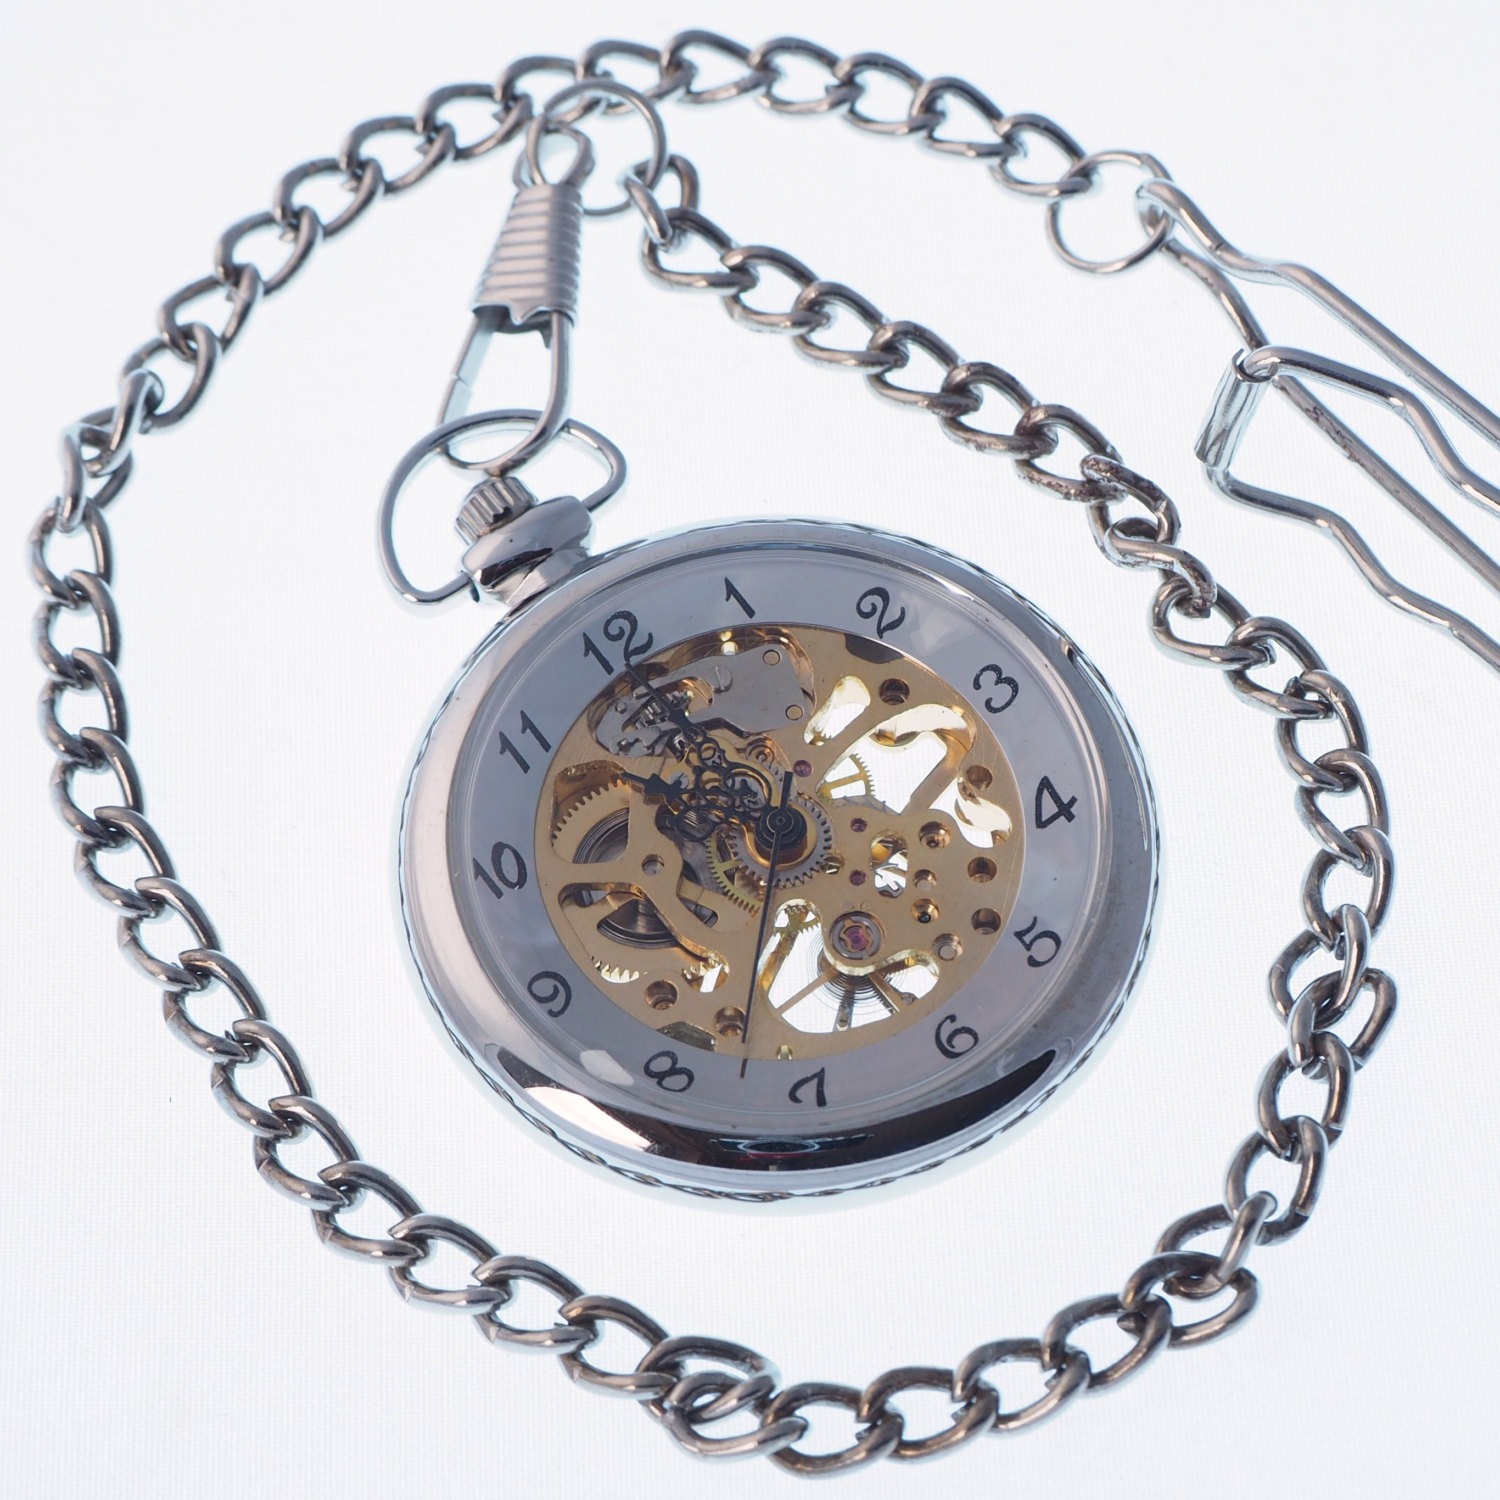 Personalized Silver Skeleton Pocket Watch Supplied In Satin Lined Gift Box PW-18 steampunk buy now online